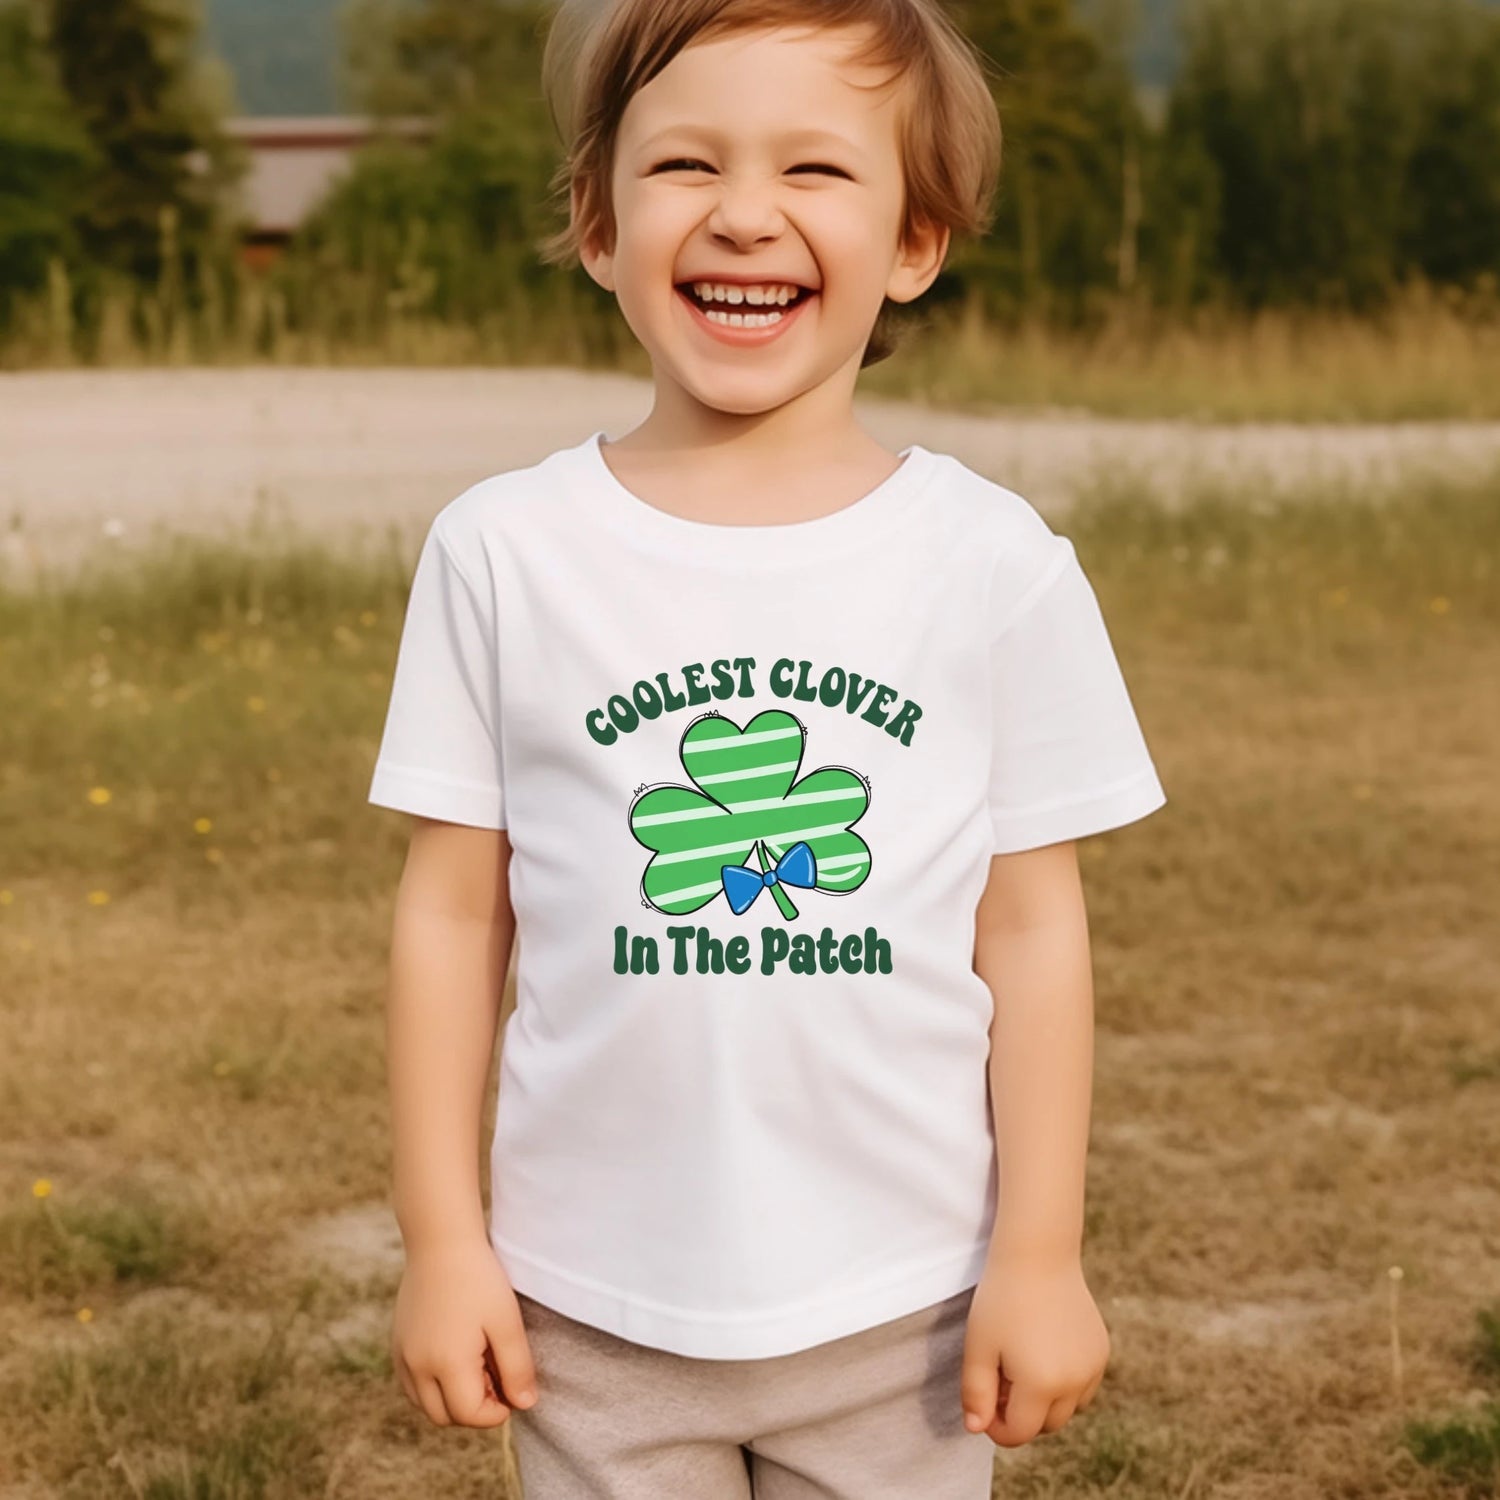 Coolest Clover In The Patch Toddler Tee